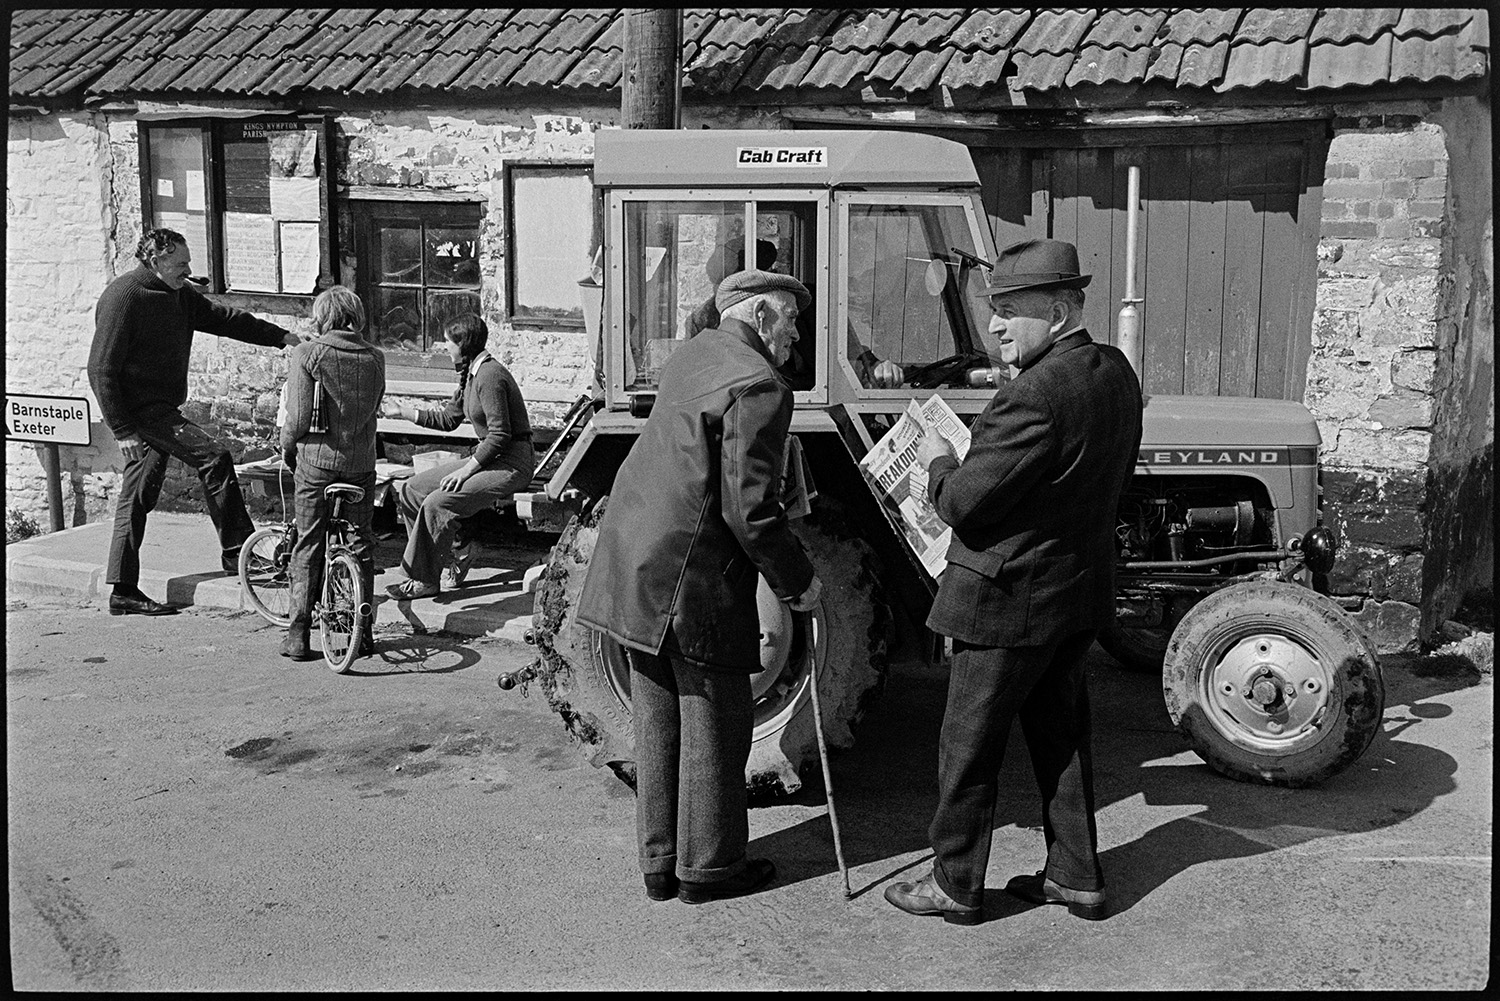 Sunday papers being sold in village, farmer in tractor and people chatting. 
[A girl sat on a bench in Kings Nympton and selling Sunday newspapers to a man smoking a pipe and a person on a bicycle. In the foreground two men are talking to a person in a tractor. One of the men has a walking stick and the other is holding a newspaper which he has just bought.]